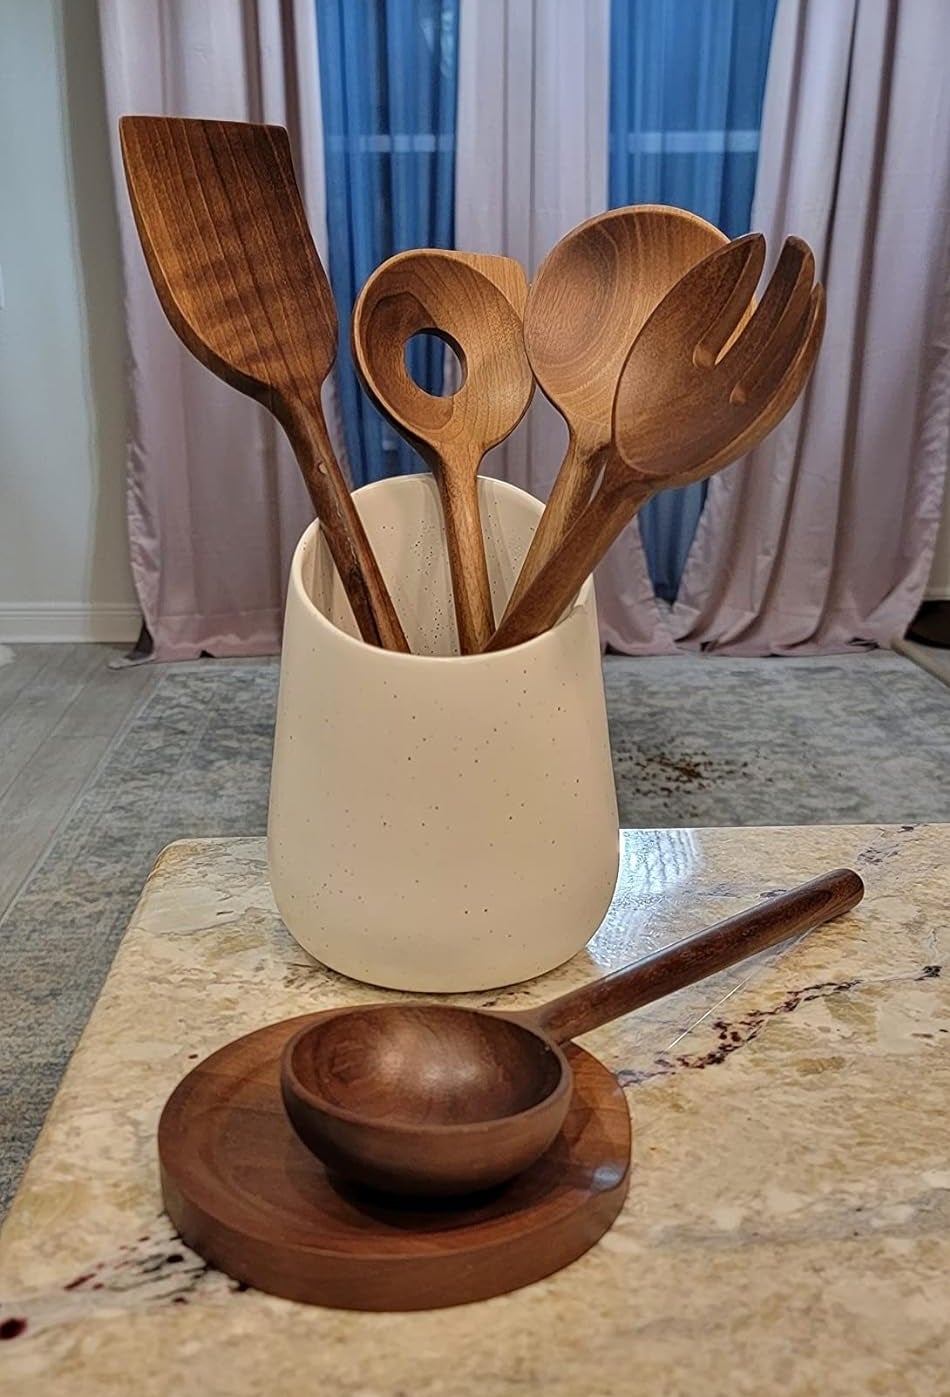 A set of wooden cooking utensils in a white holder with a wooden rest on a kitchen counter